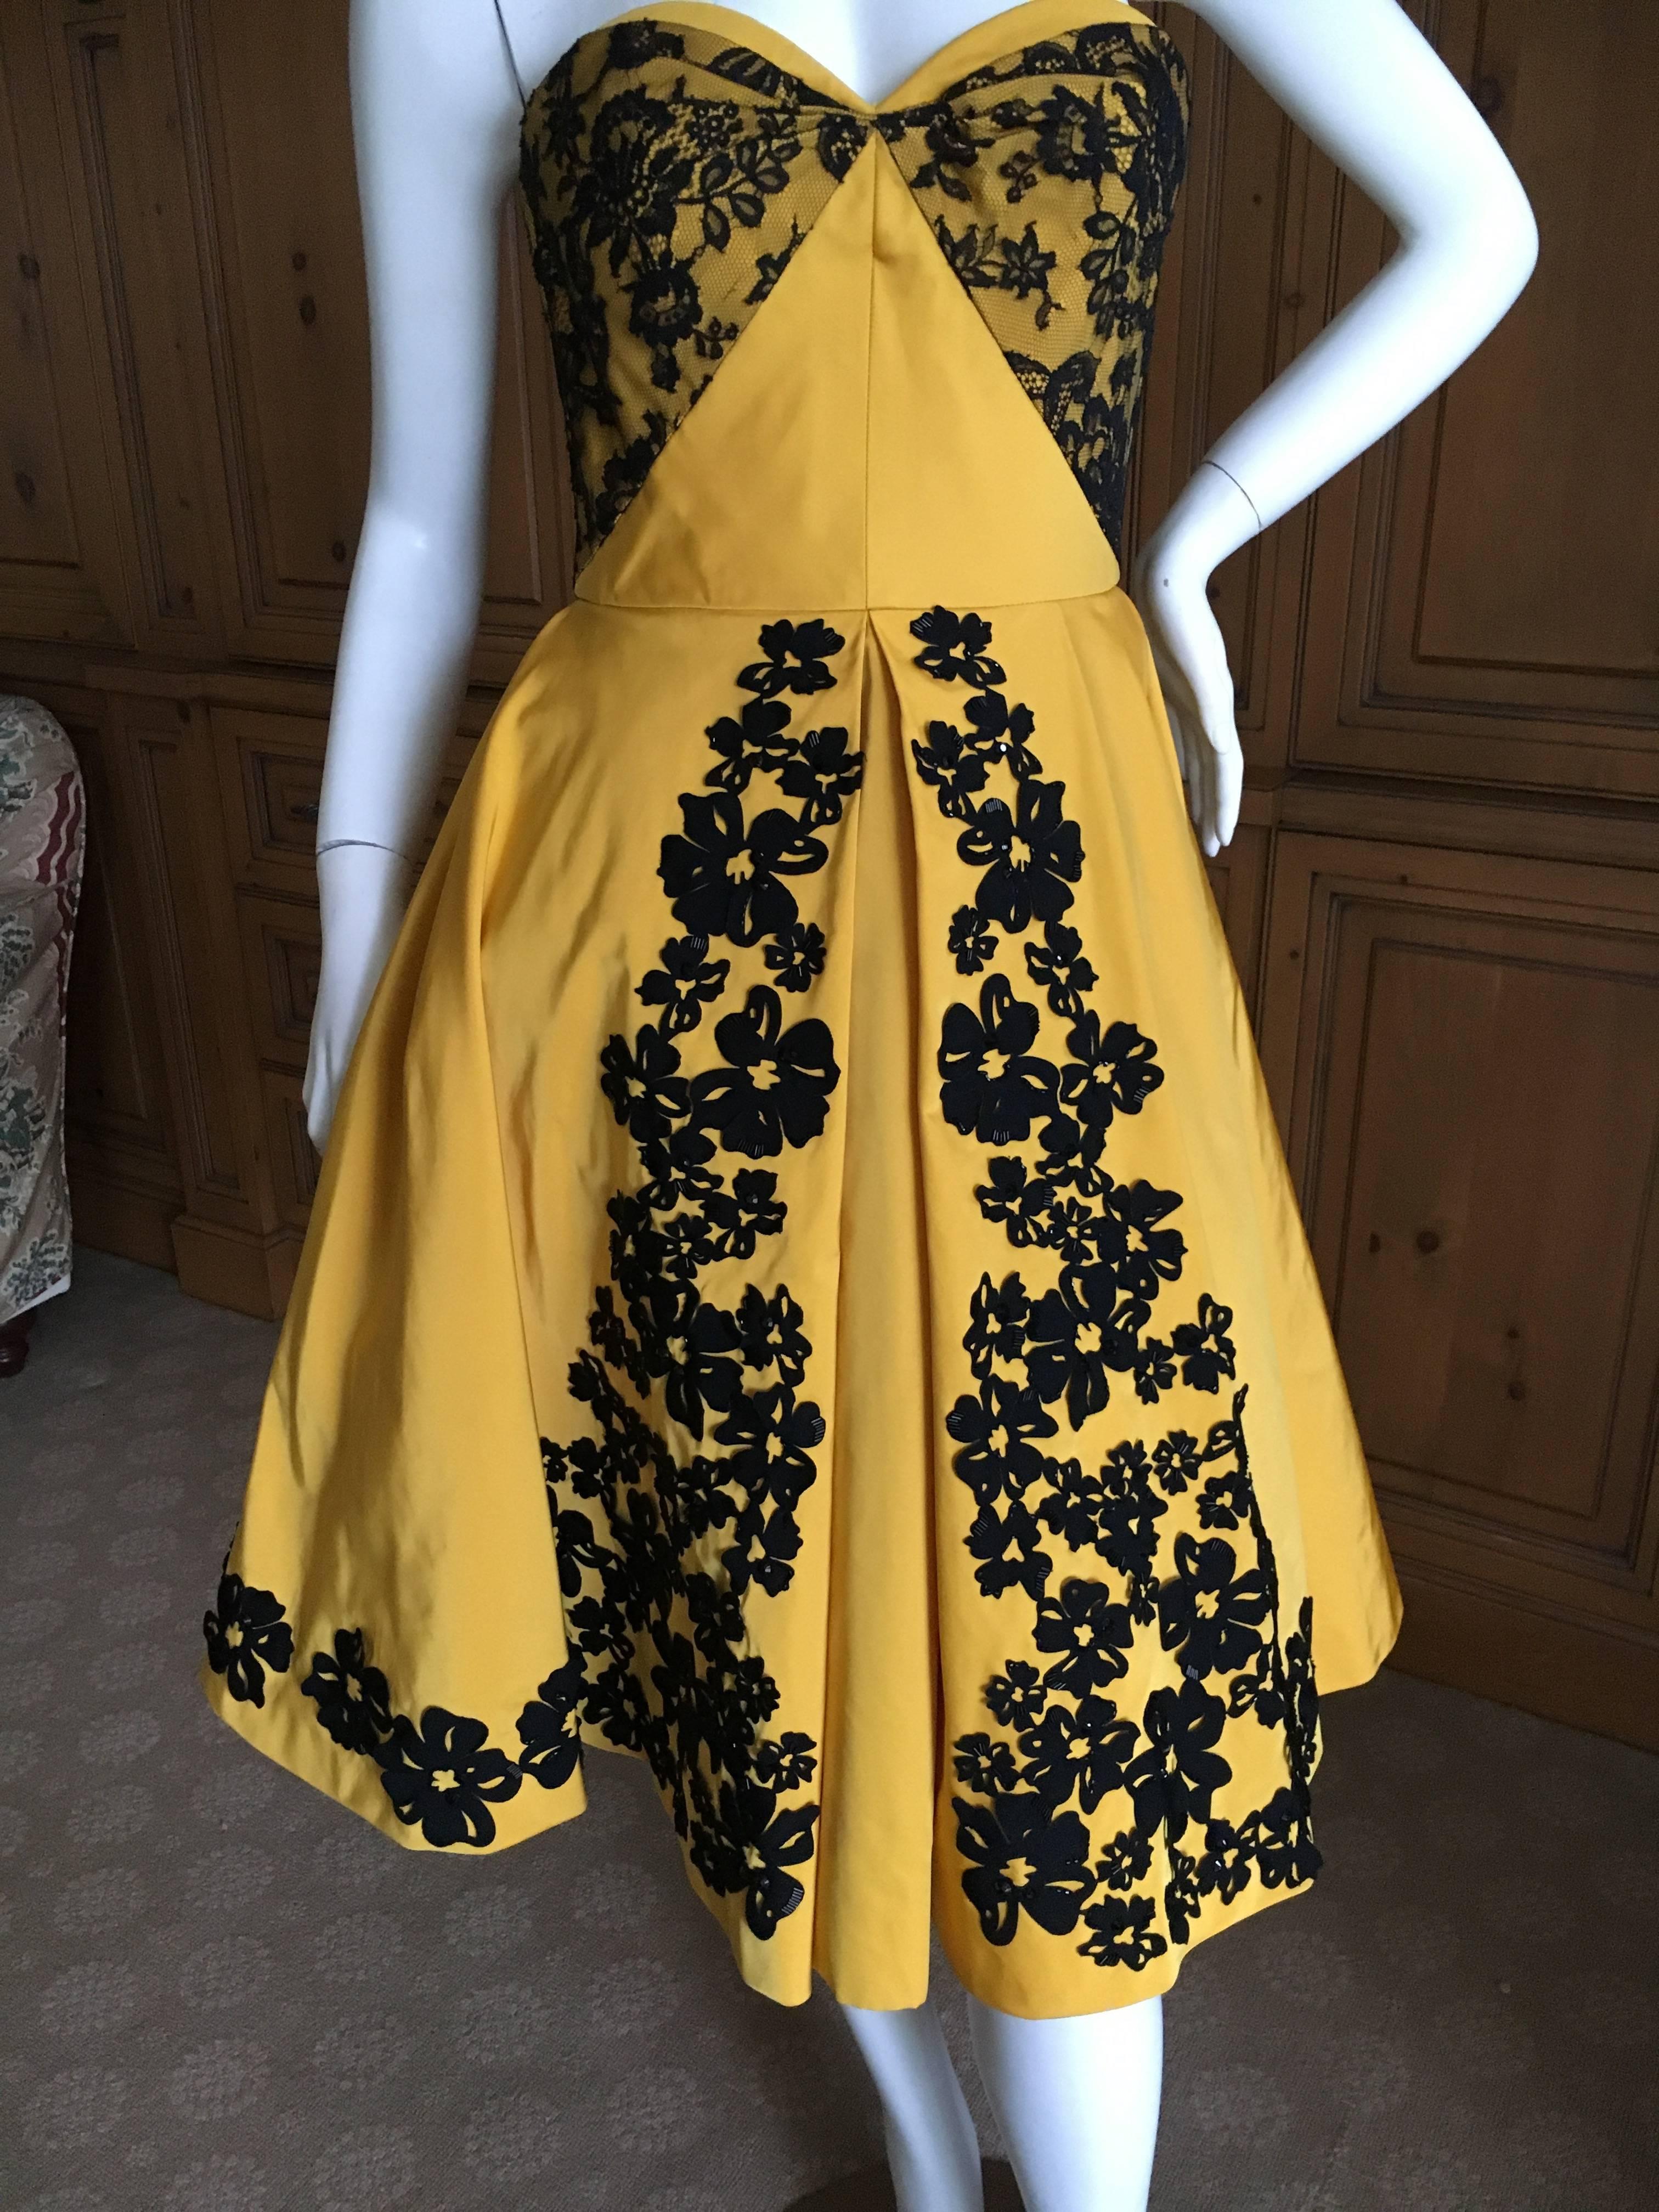 Delightful yellow silk dress with black floral appliques from Oscar de la Renta.
Inner structured corset, comes with matching mink shrug.
Size 2
Bust 34"
Waist 24"
Hips 44"
Length 32"
Worn once, excellent condition
